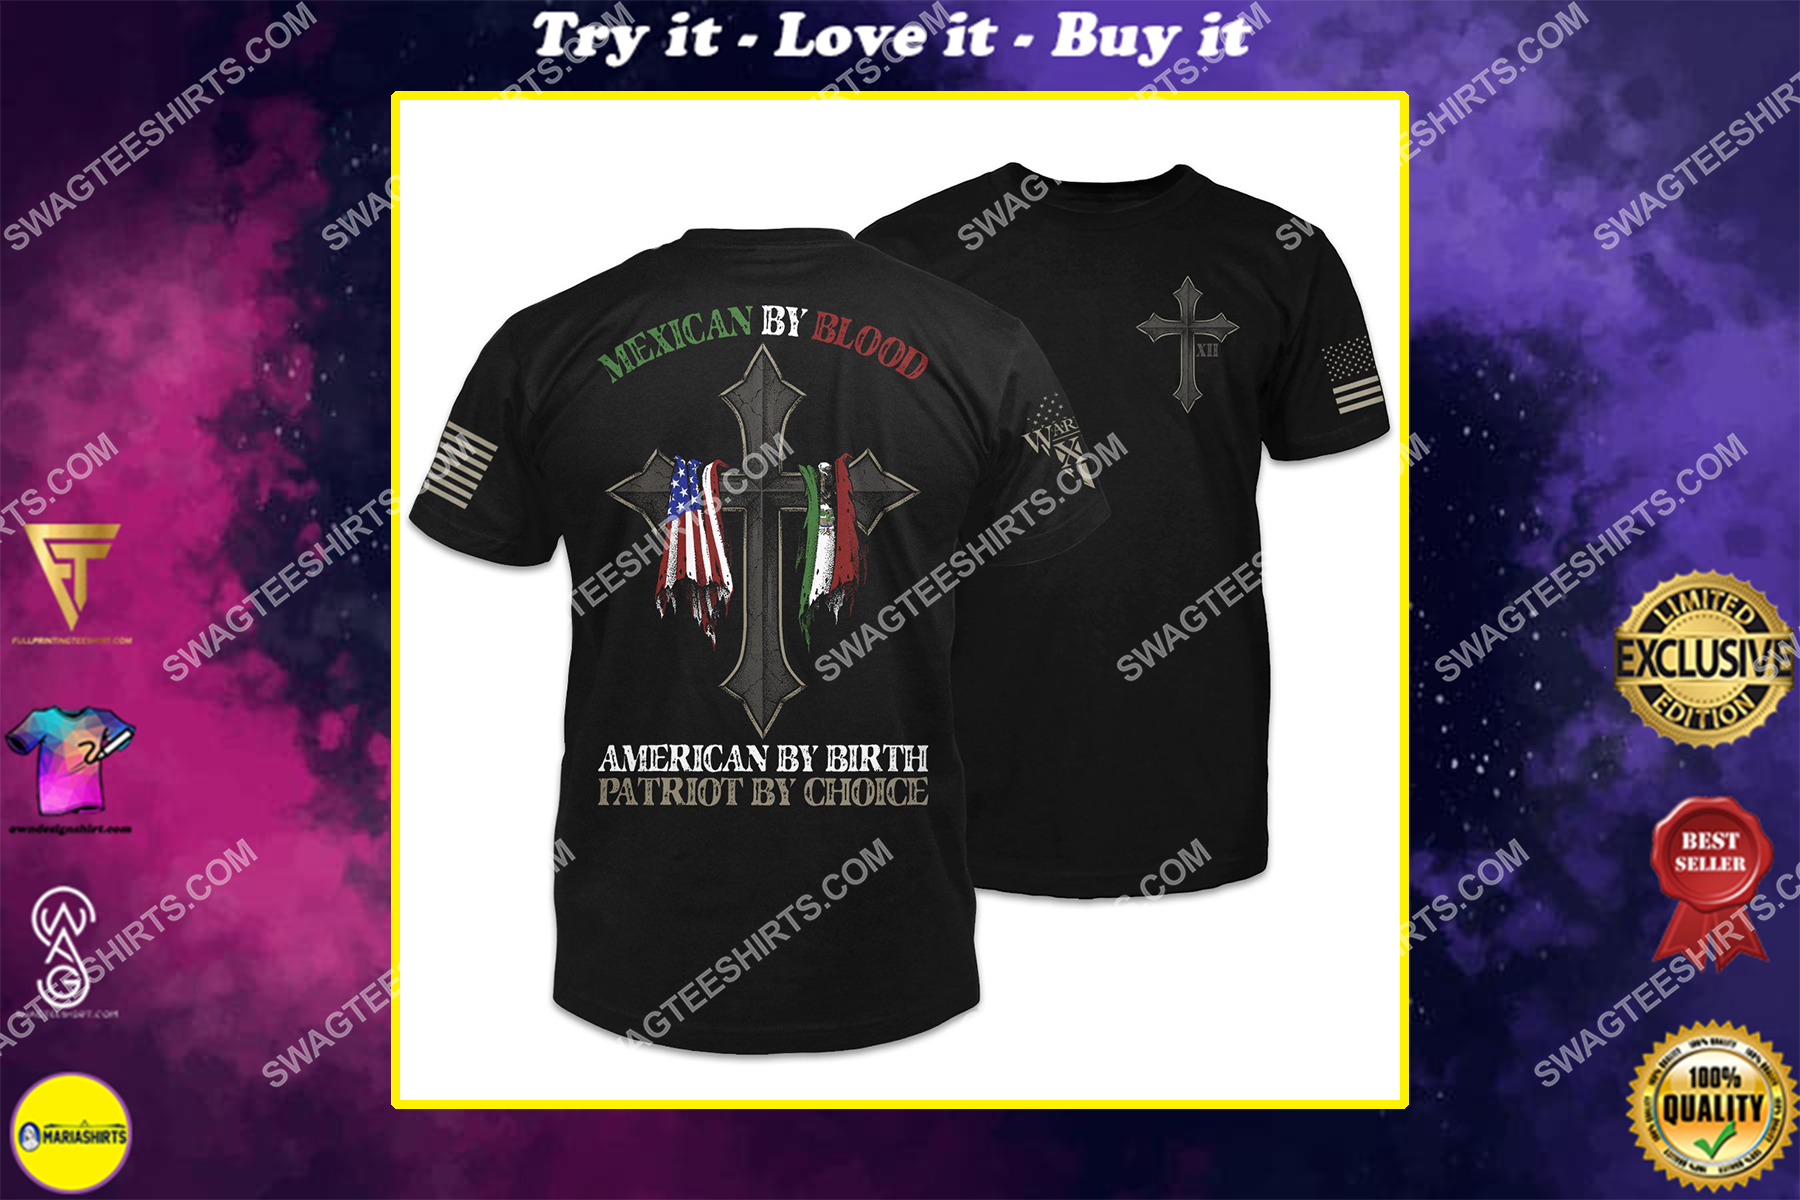 mexican by blood american by birth patriot by choice shirt